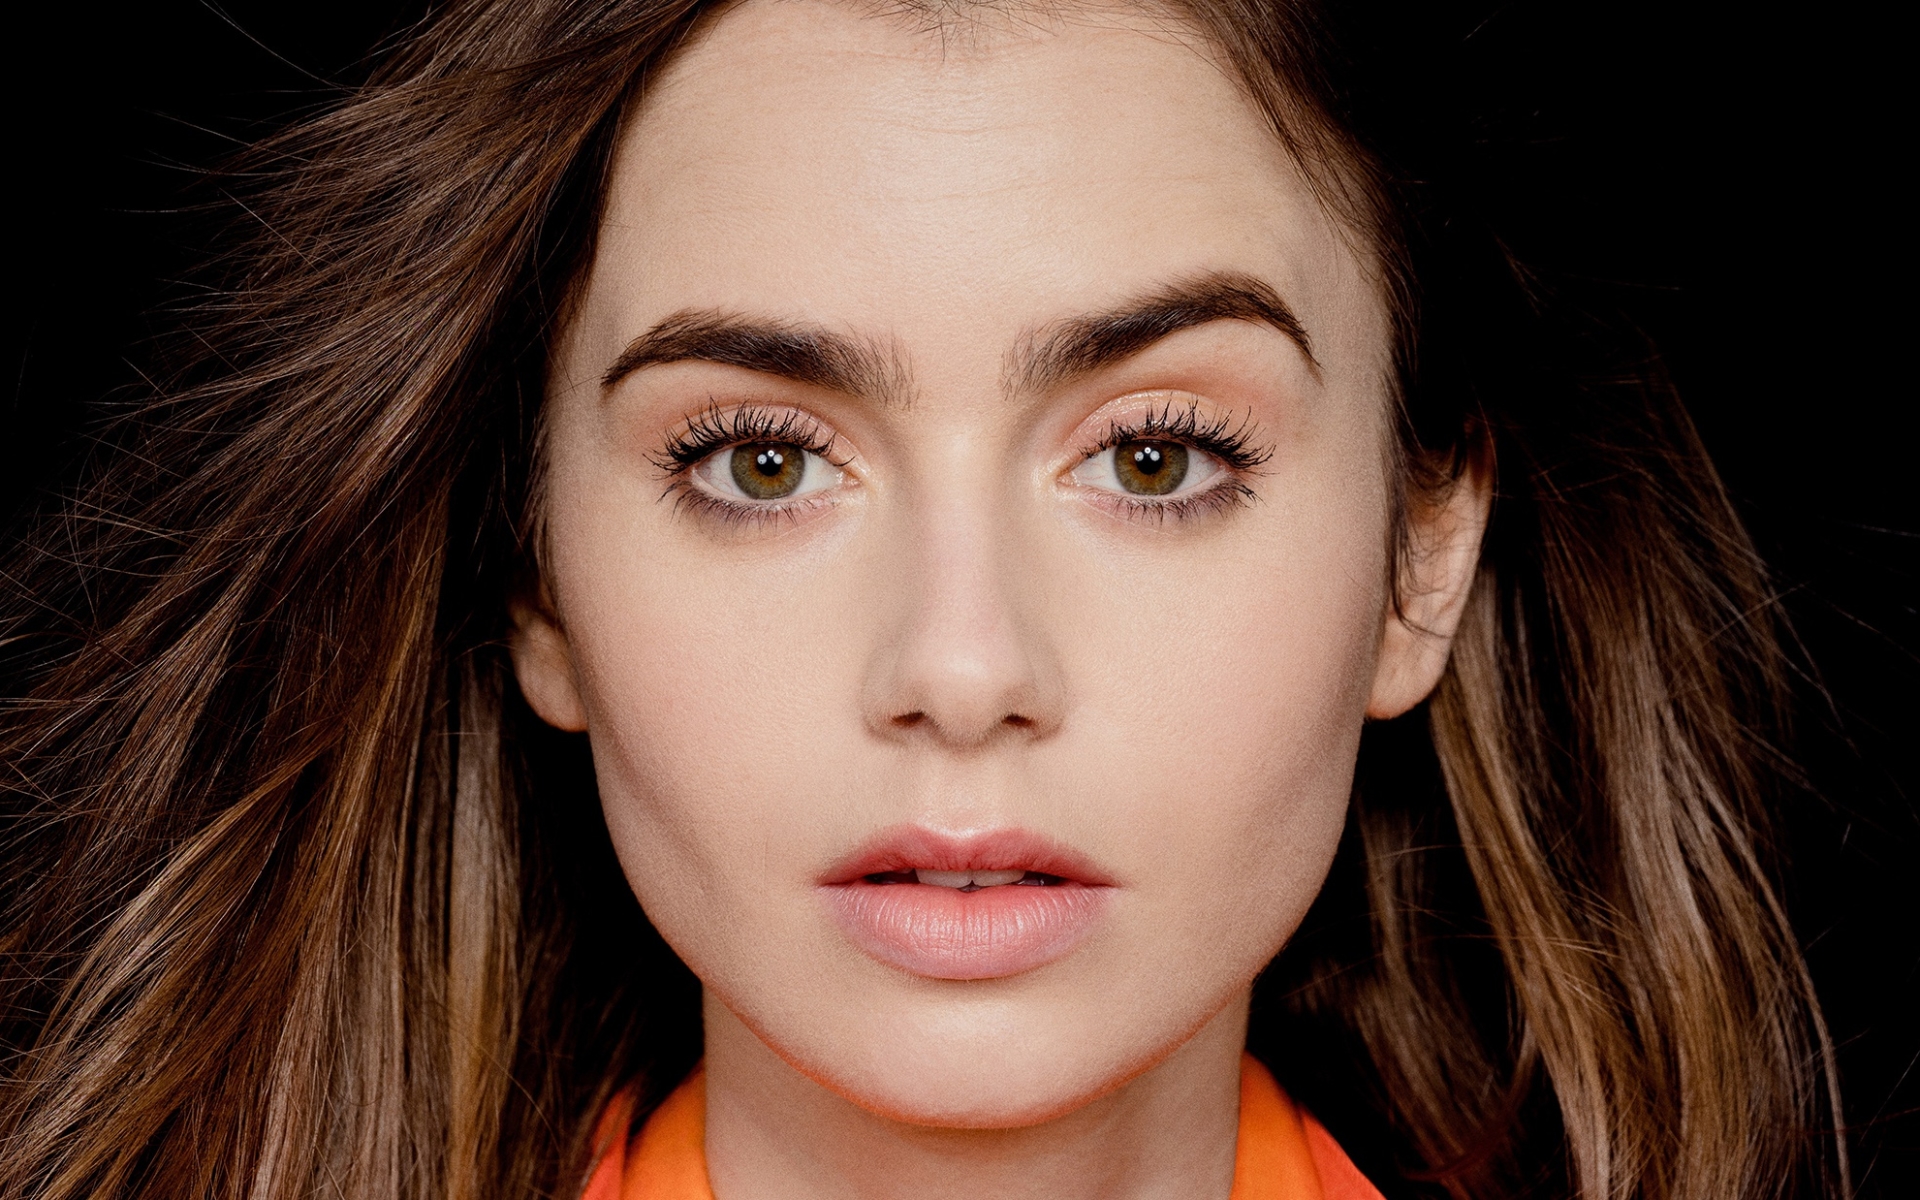 Wallpaper of Actress, Brunette, English, Lily Collins, Stare